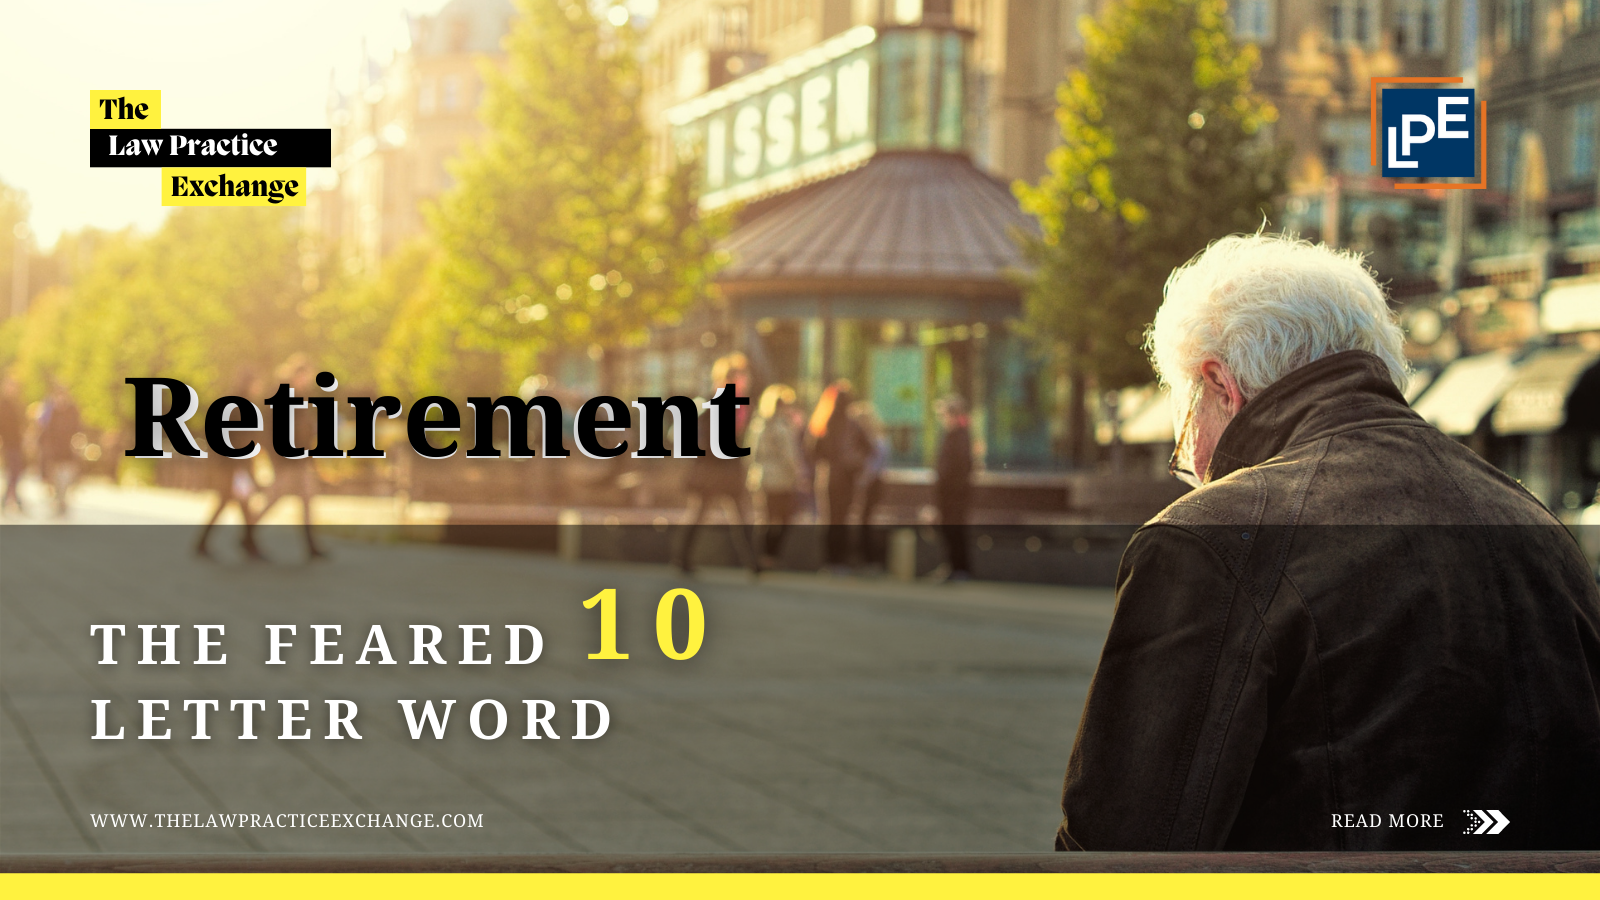 appear when searched about The Feared 10 Letter Word: Retirement.